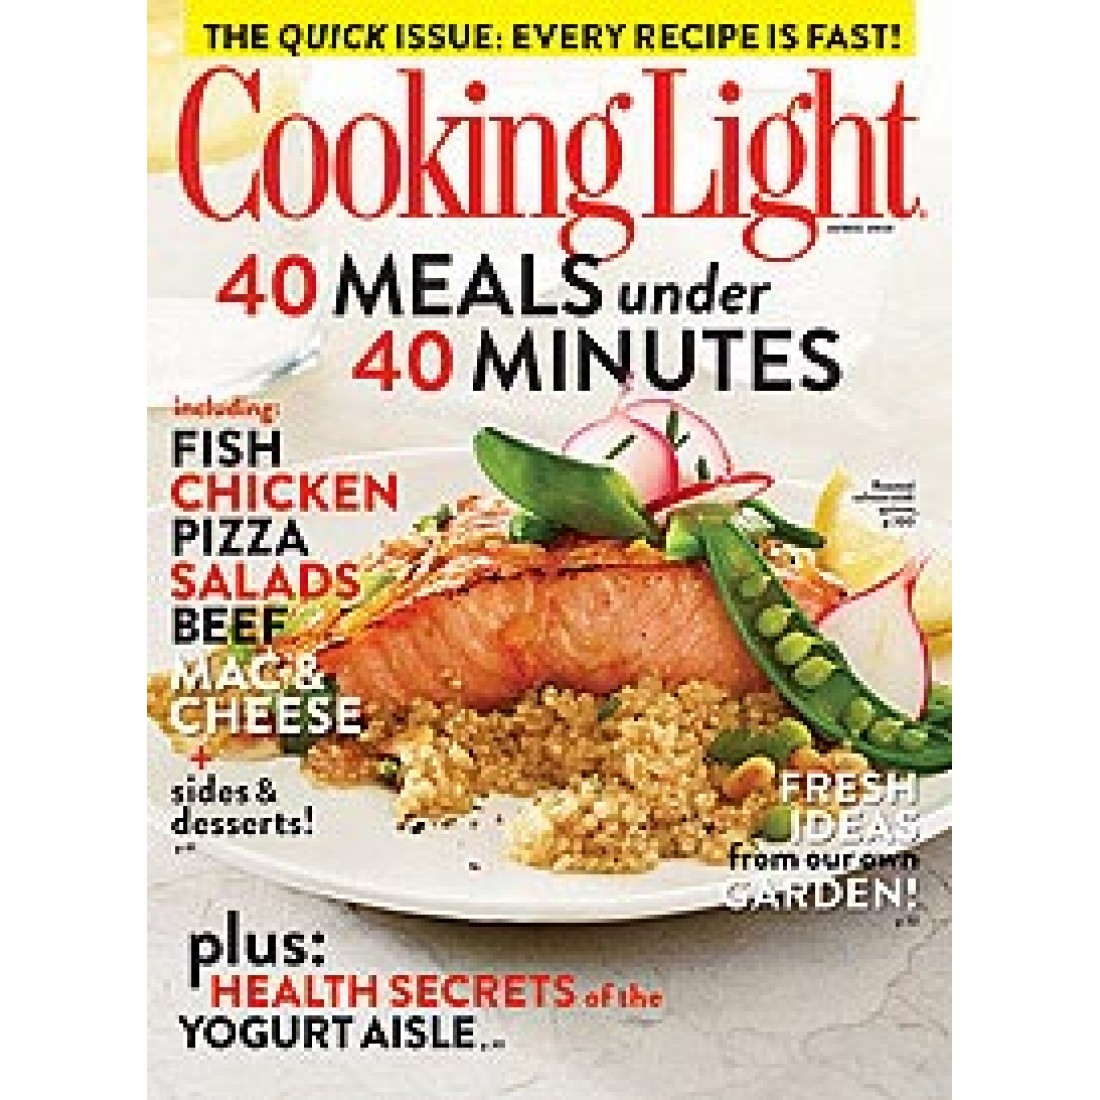 Cooking Light Magazine Subscriber Services